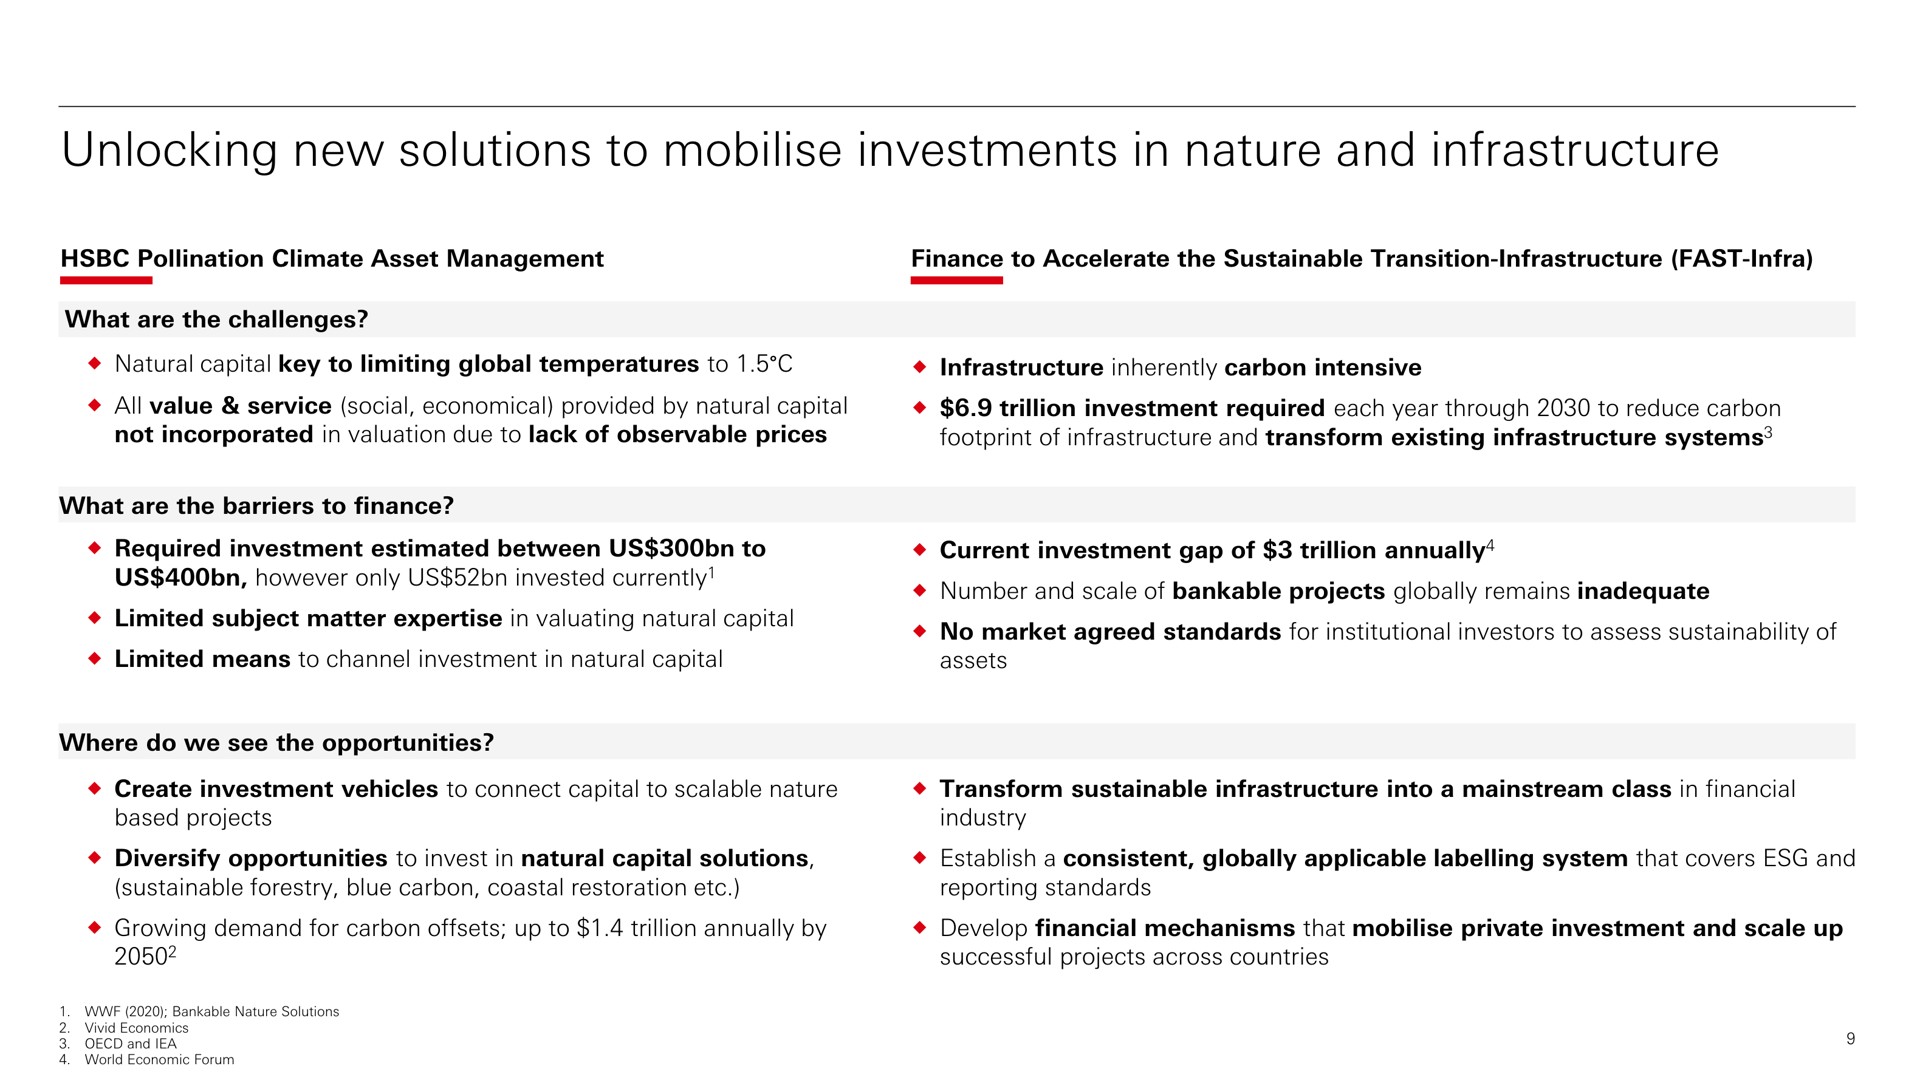 unlocking new solutions to investments in nature and infrastructure | HSBC